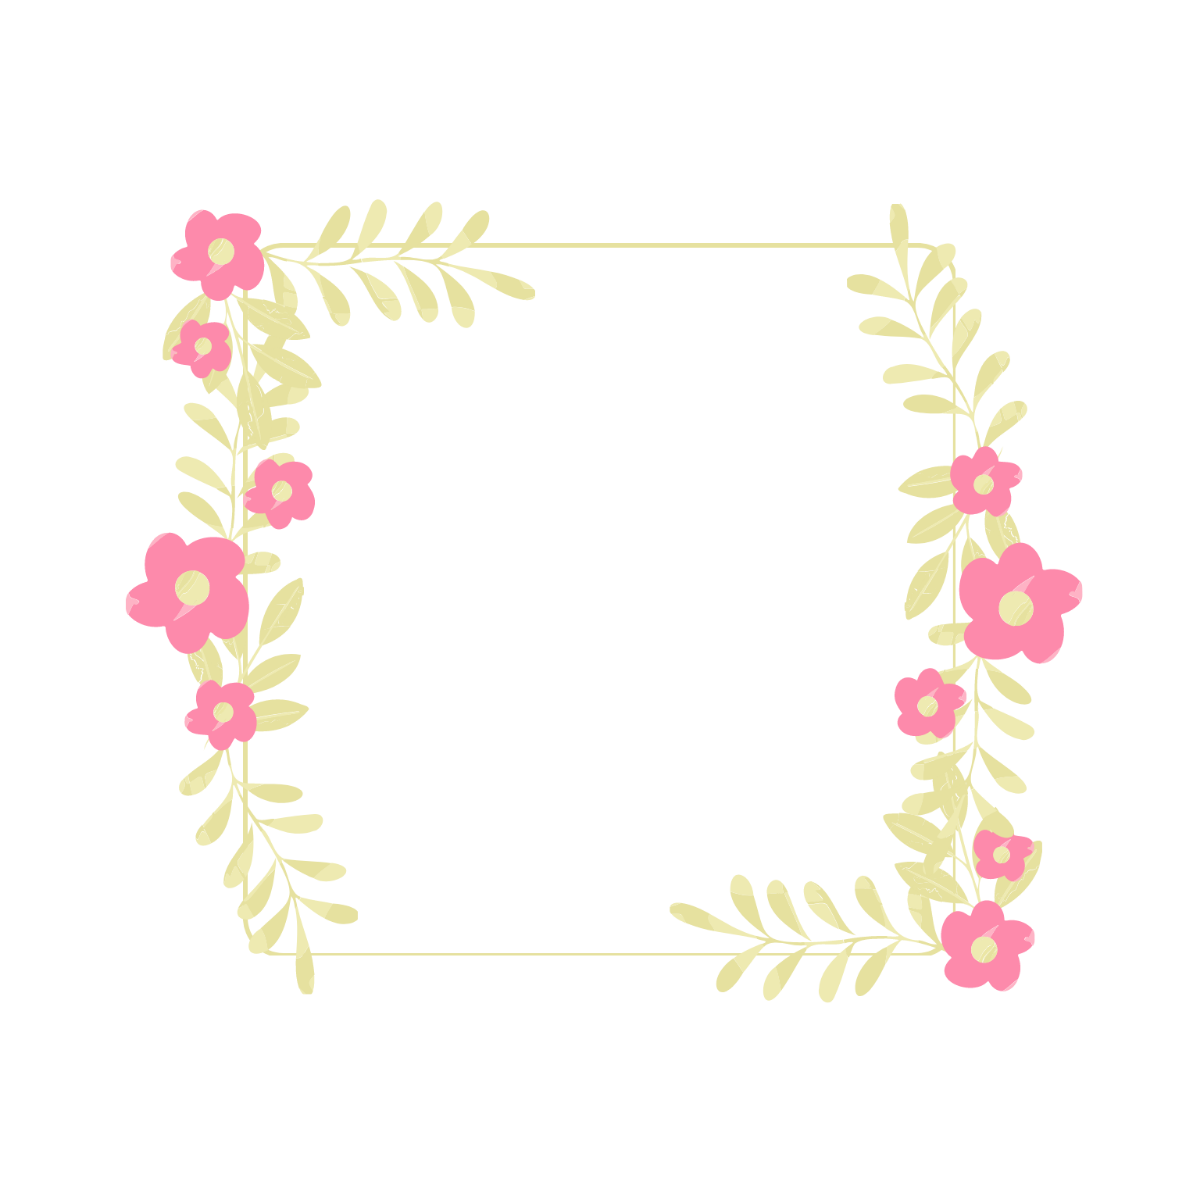 Watercolor Floral Border Clipart Template